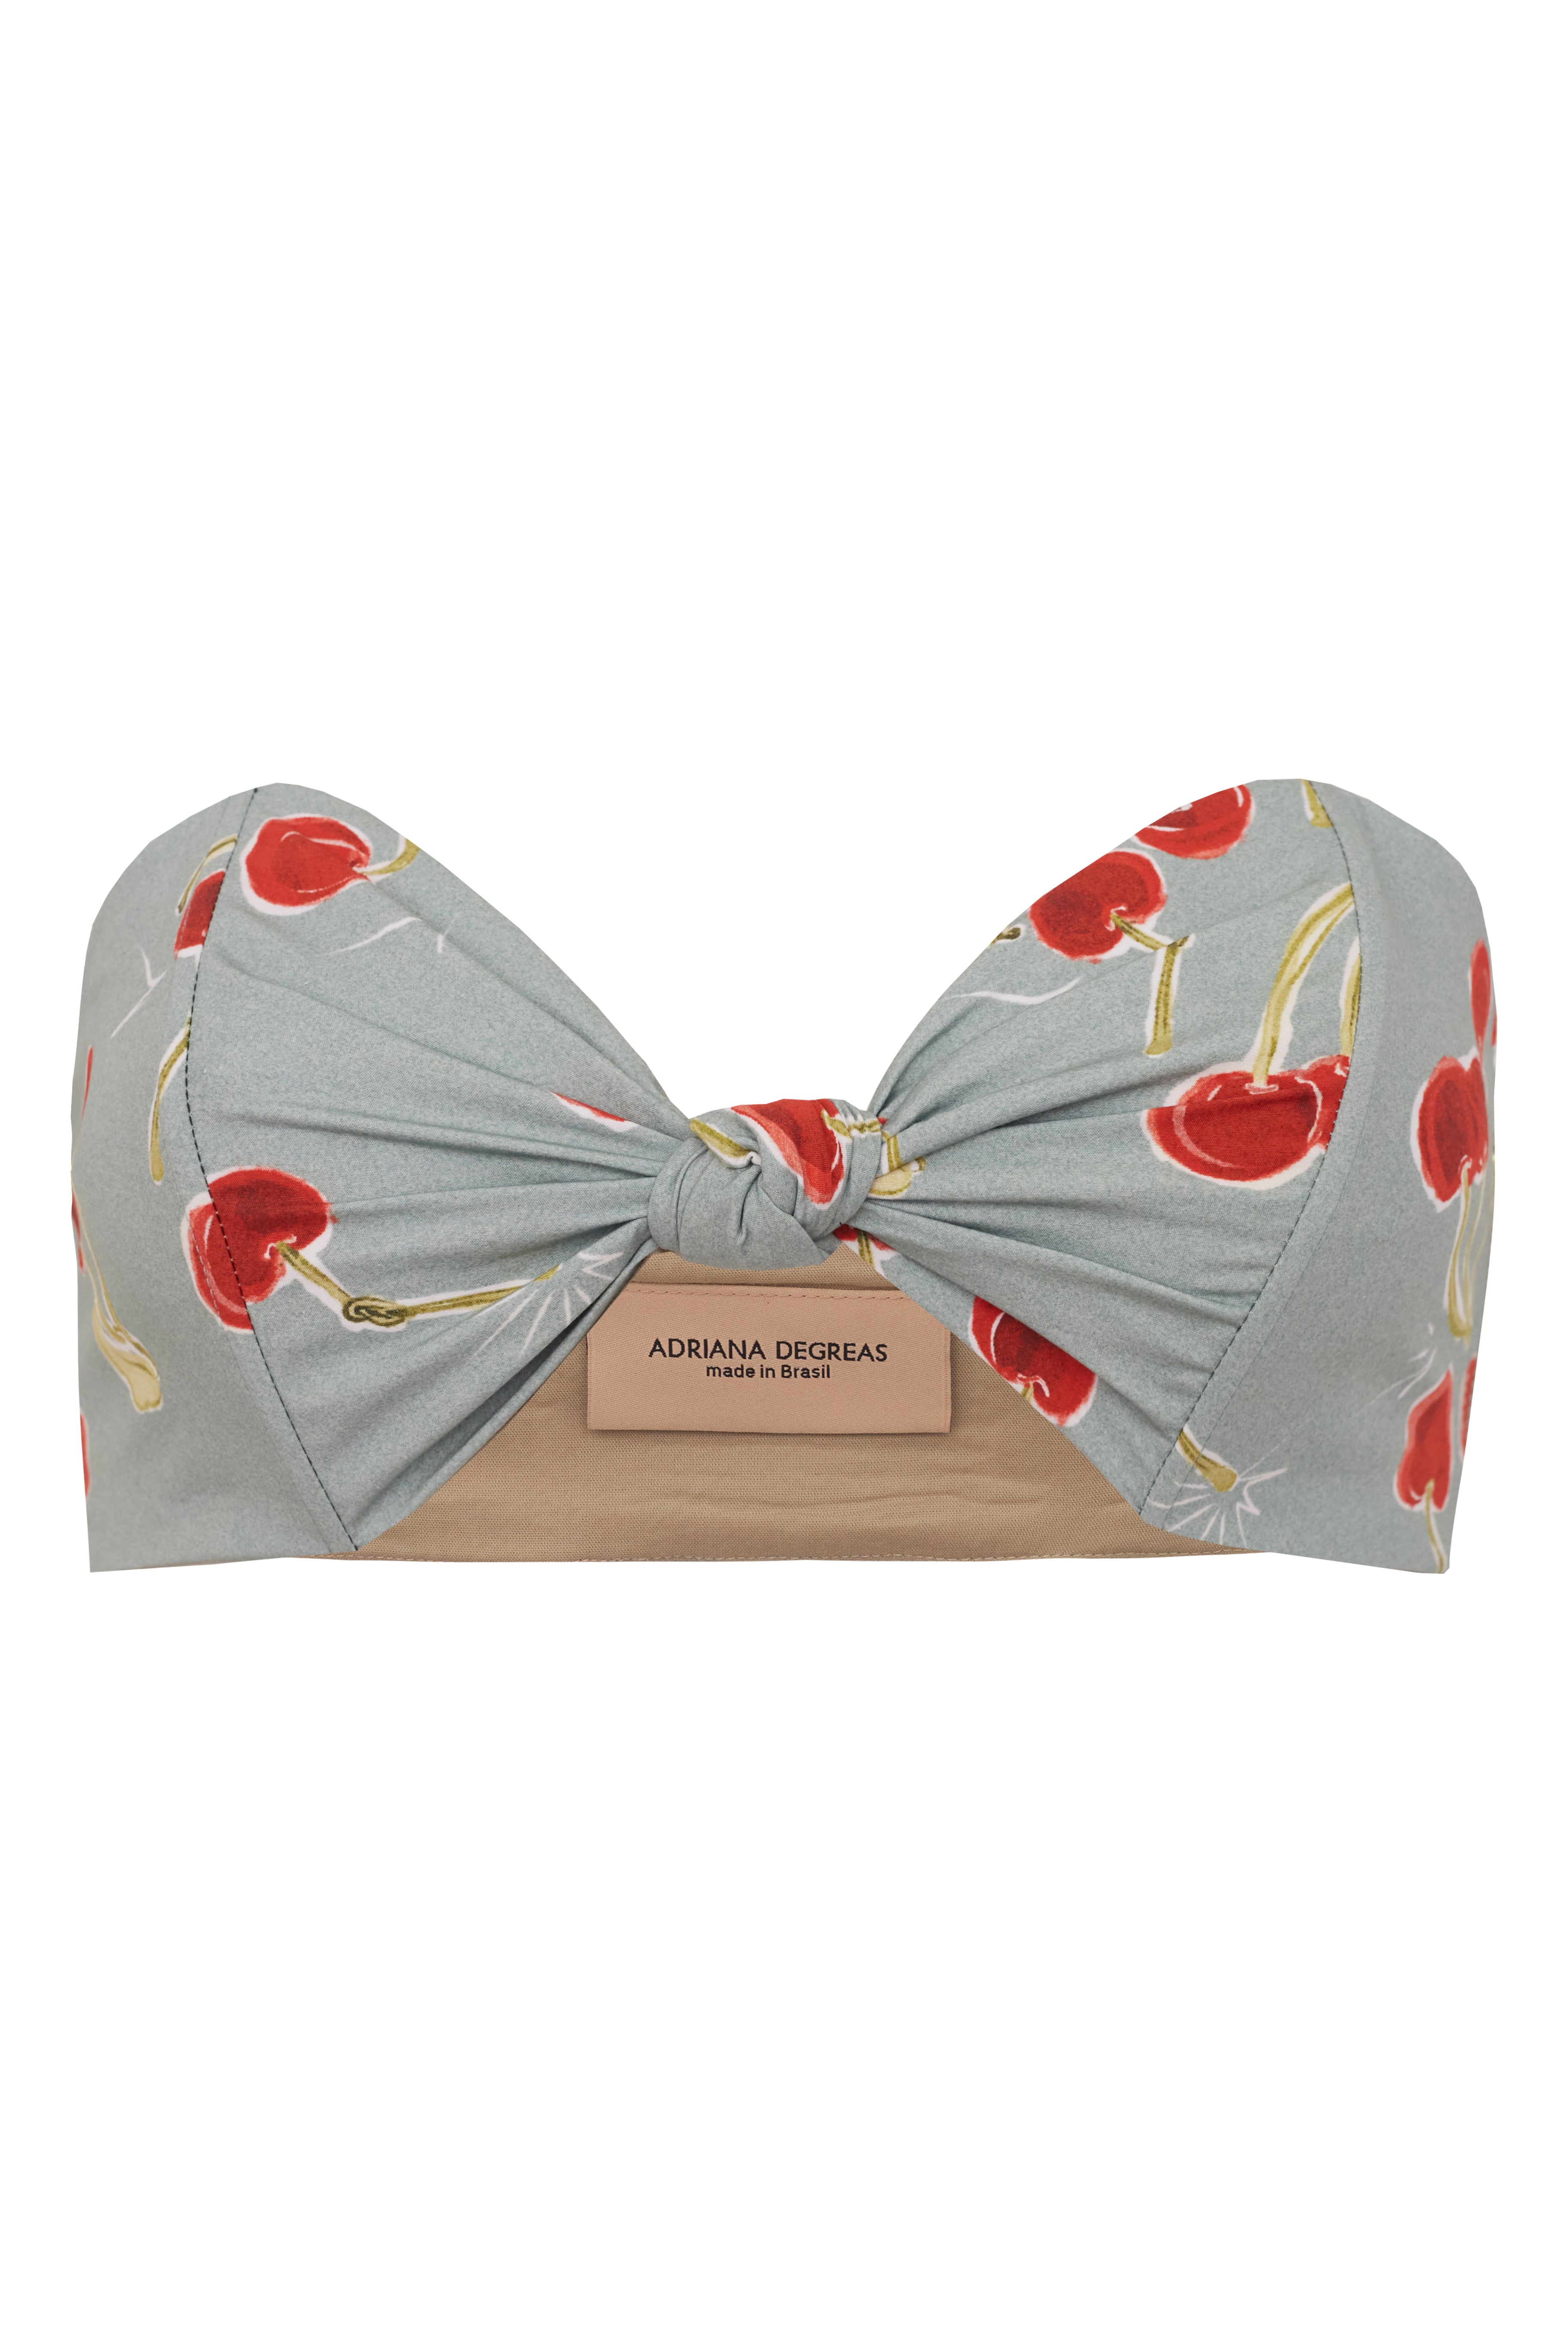 Cherry Bomb Blue Strapless Top Product